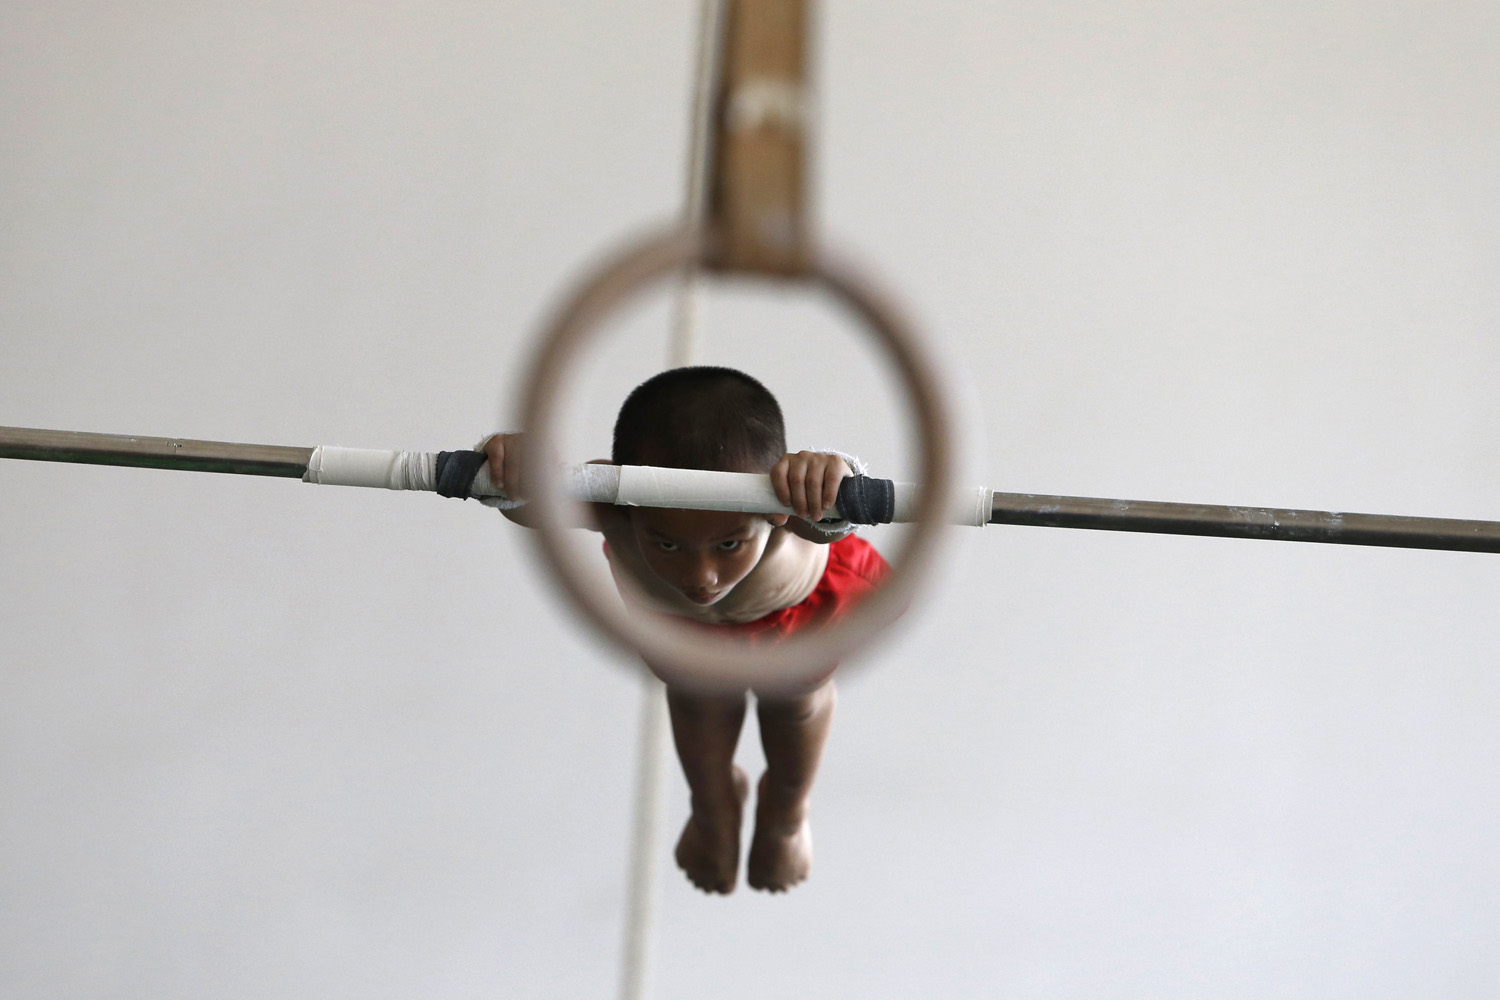 July 14, 2013. A six-year-old gymnast practices on a horizontal bar at the gymnastics hall of a sports school in Jiaxing, Zhejiang province, China.